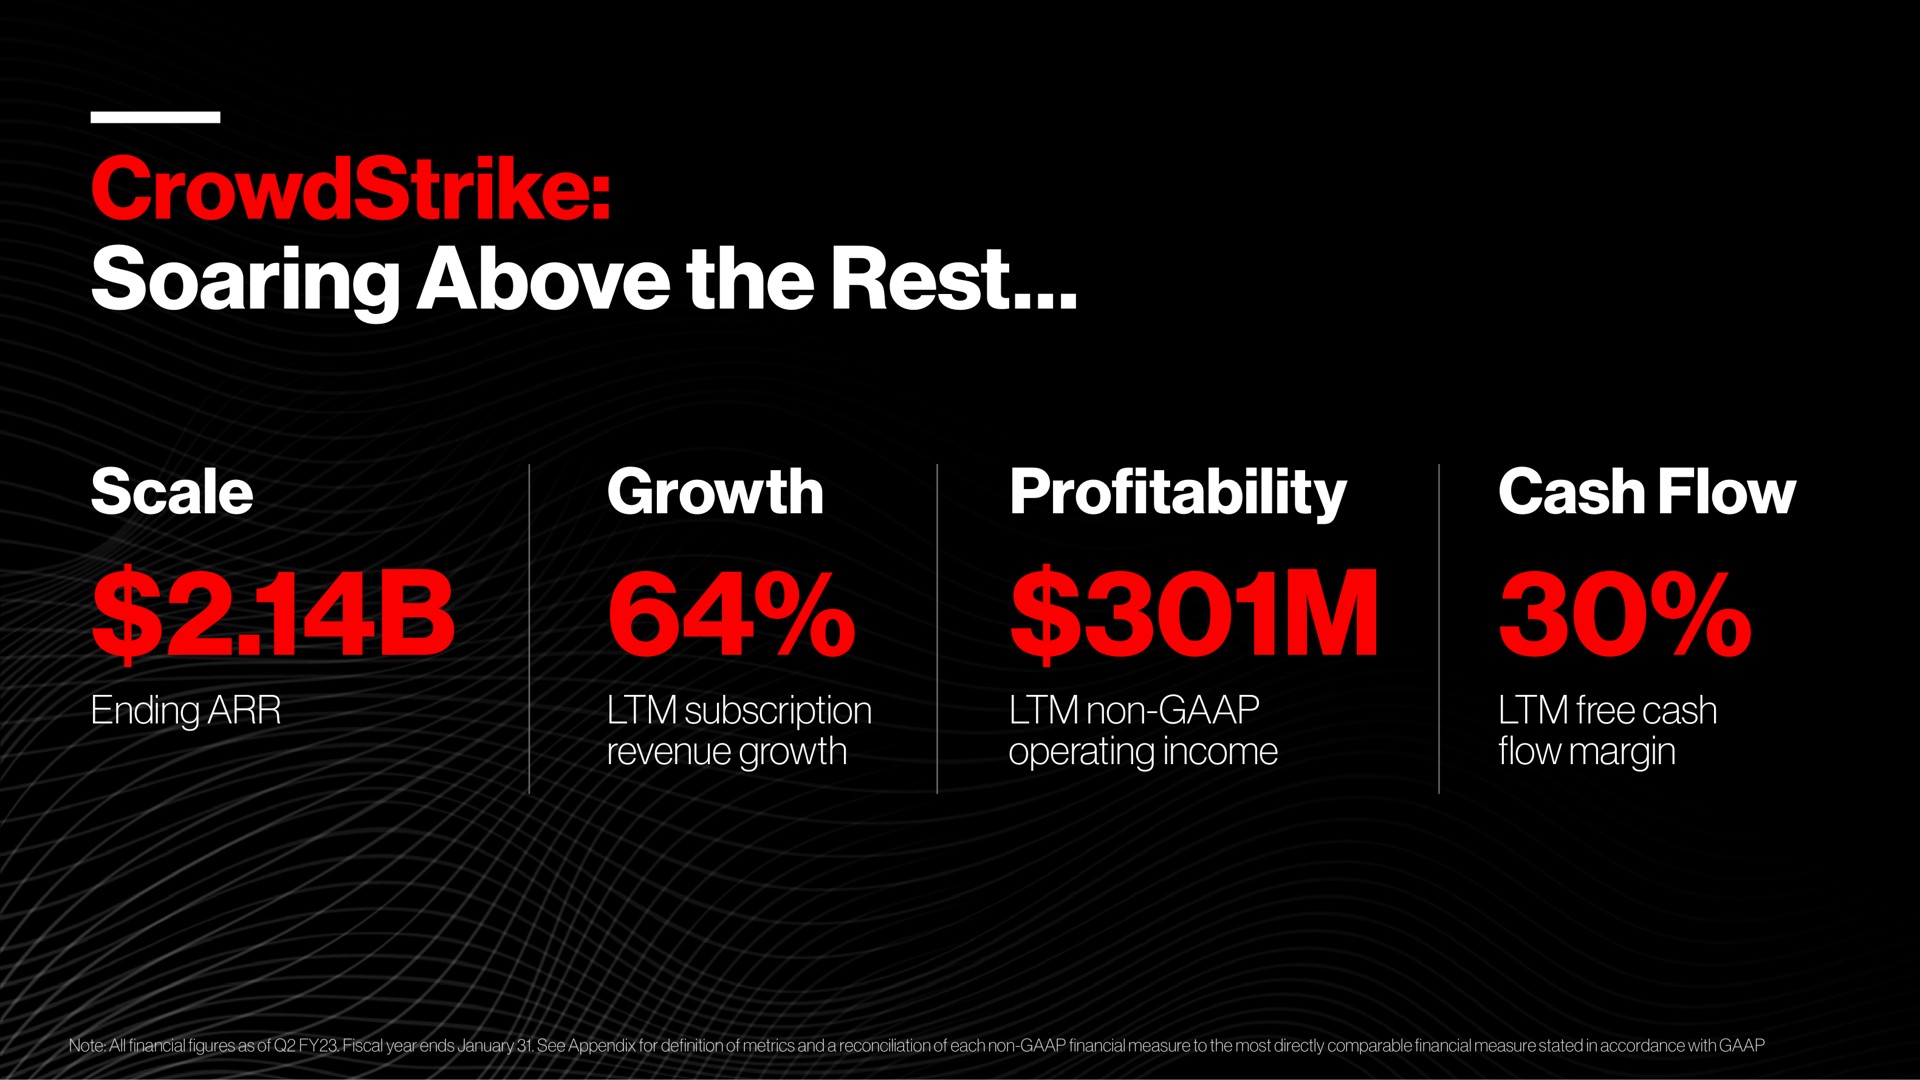 soaring above the rest scale ending growth subscription revenue growth profitability non operating income cash flow free cash flow margin lim | Crowdstrike